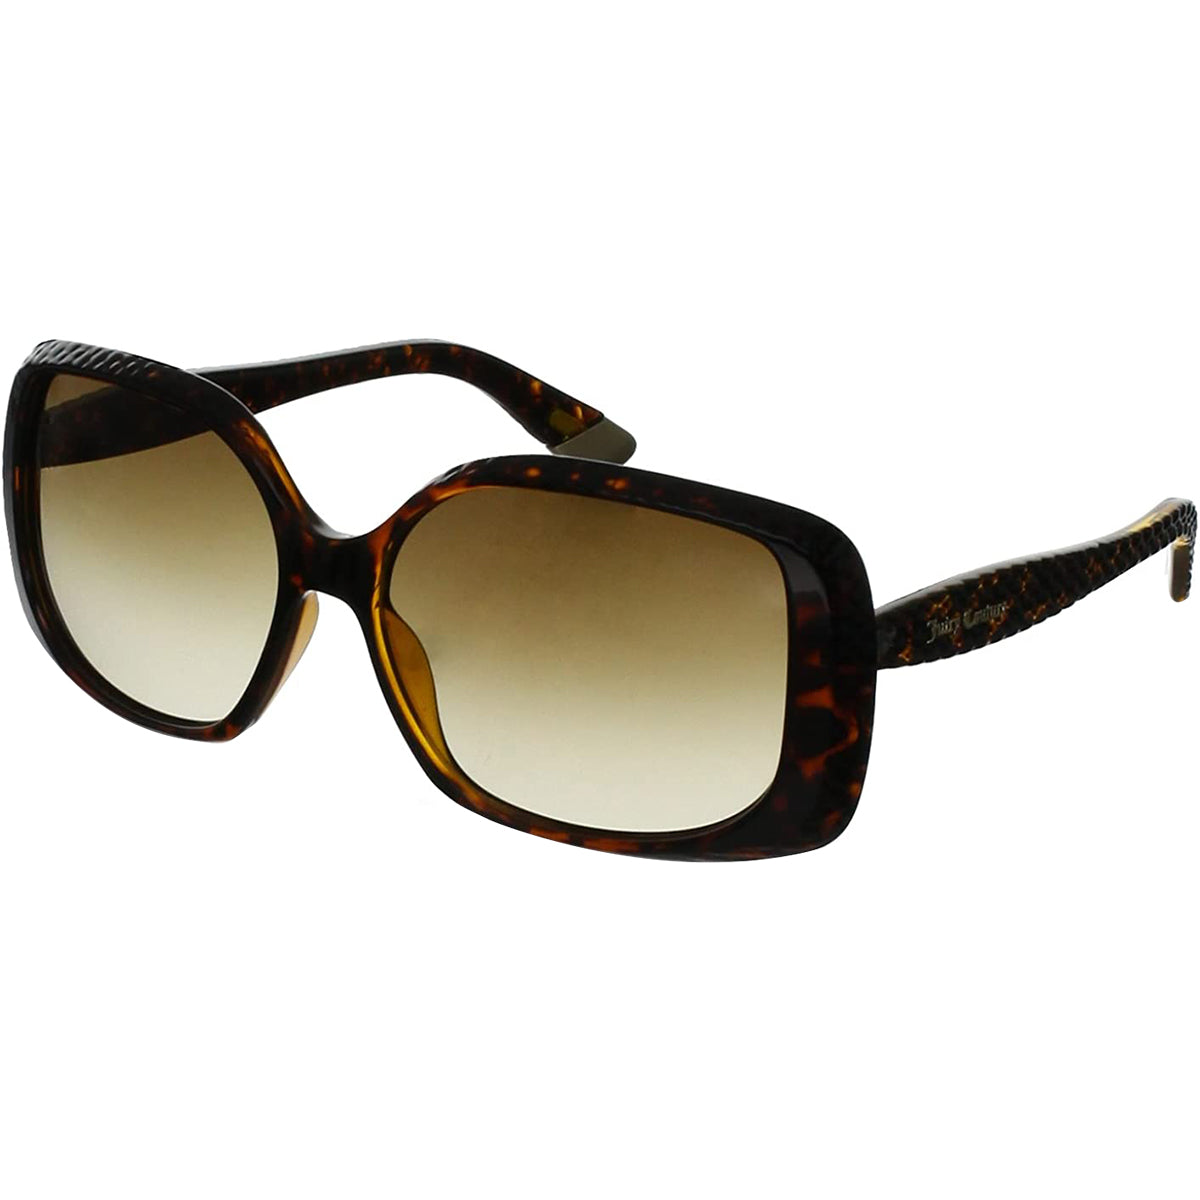 Juicy Couture 530/S Women's Lifestyle Sunglasses-JUC